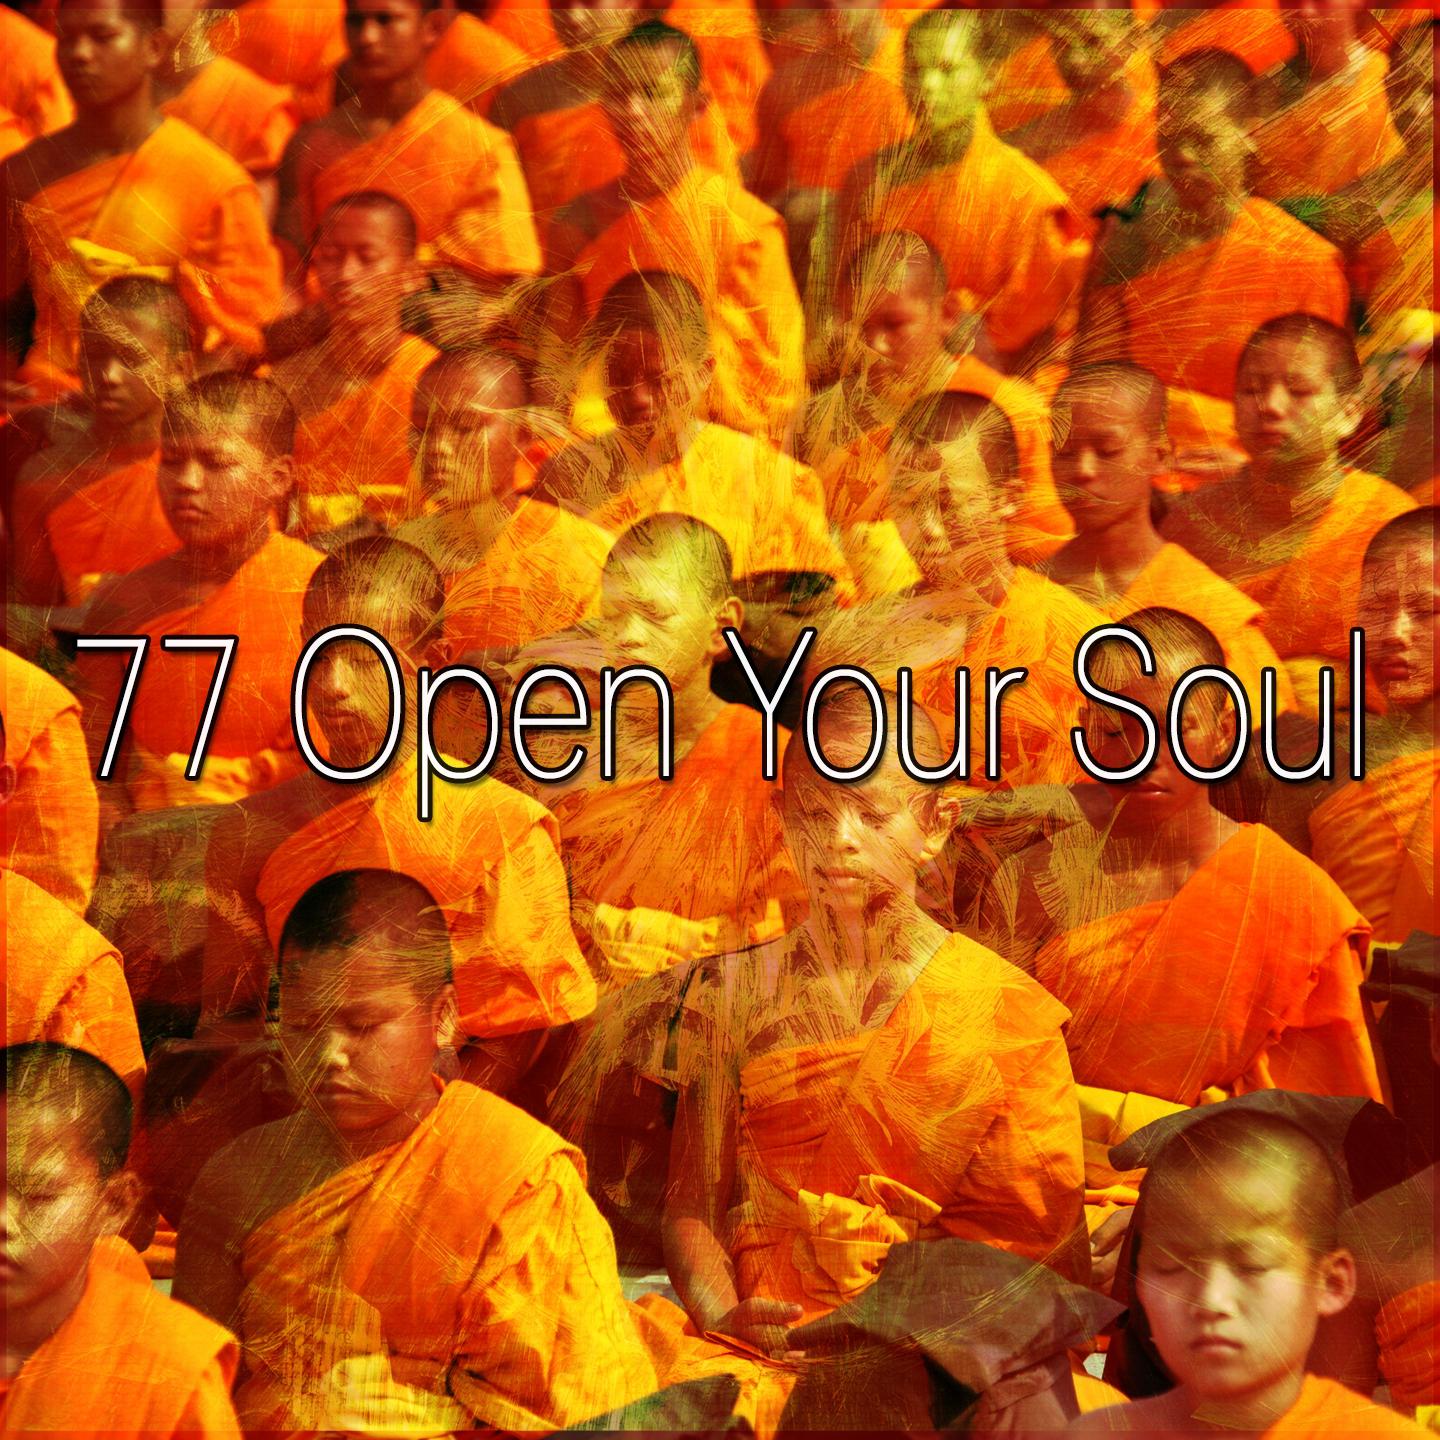 77 Open Your Soul